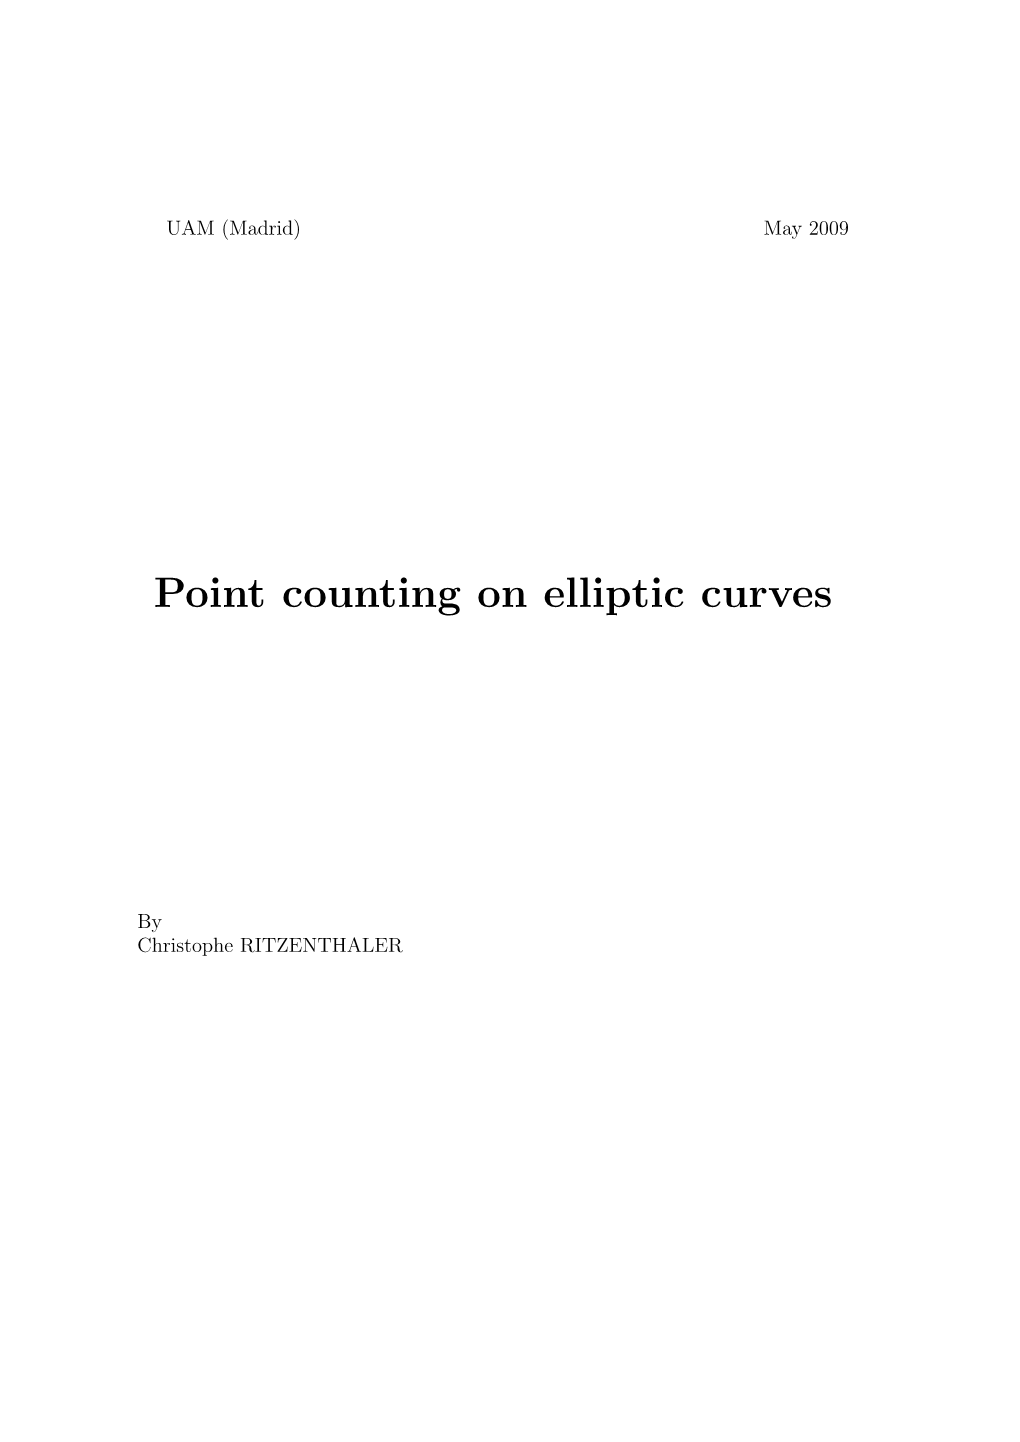 Point Counting on Elliptic Curves